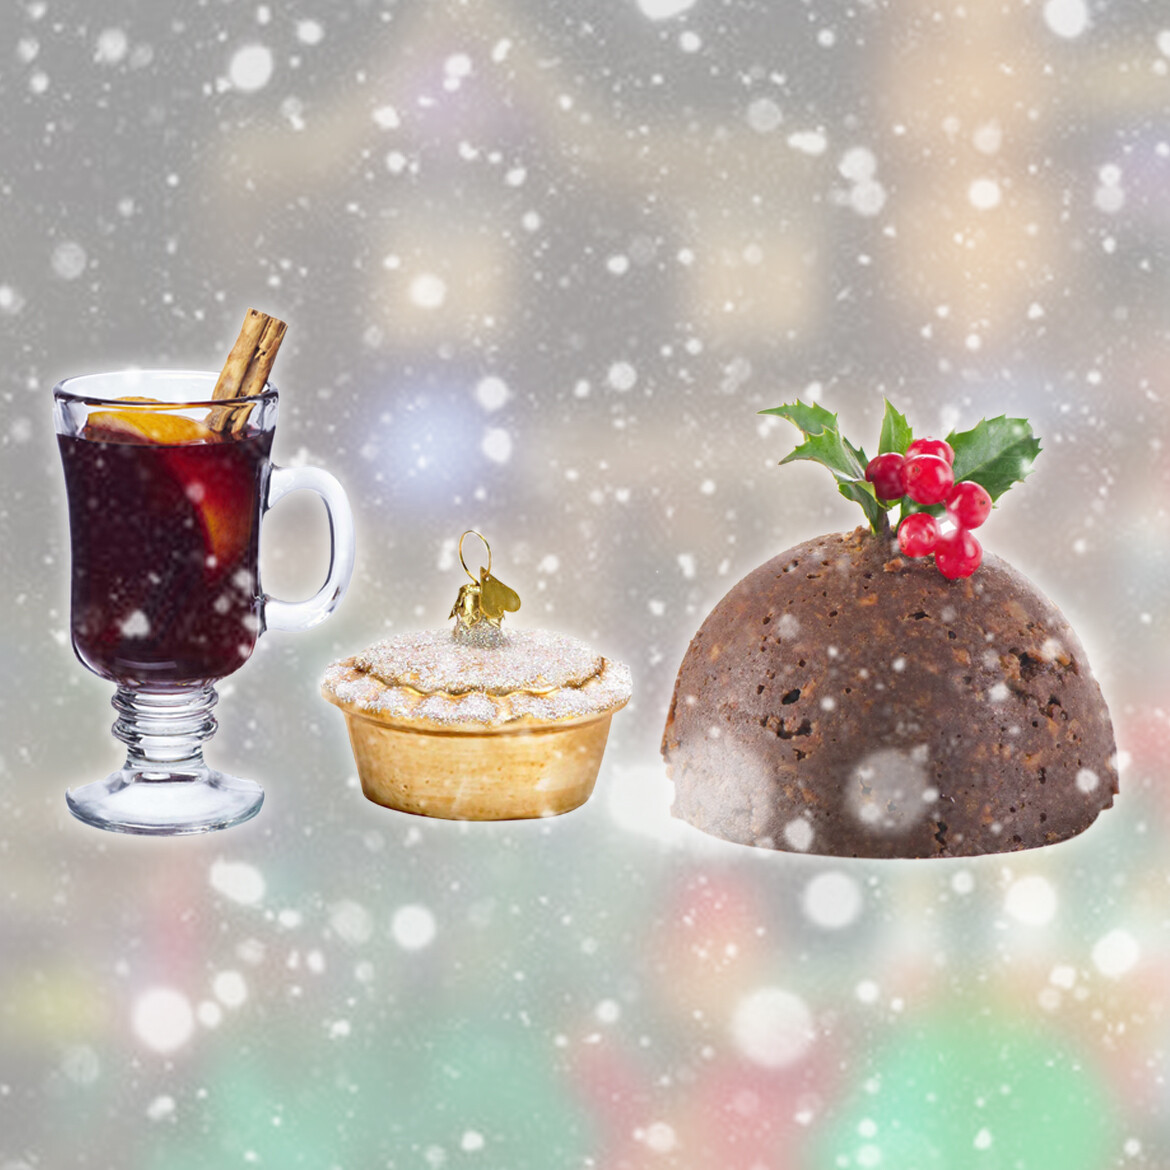 Virtual Mulled Wine and Festive Fare for our Social Media Ambassador